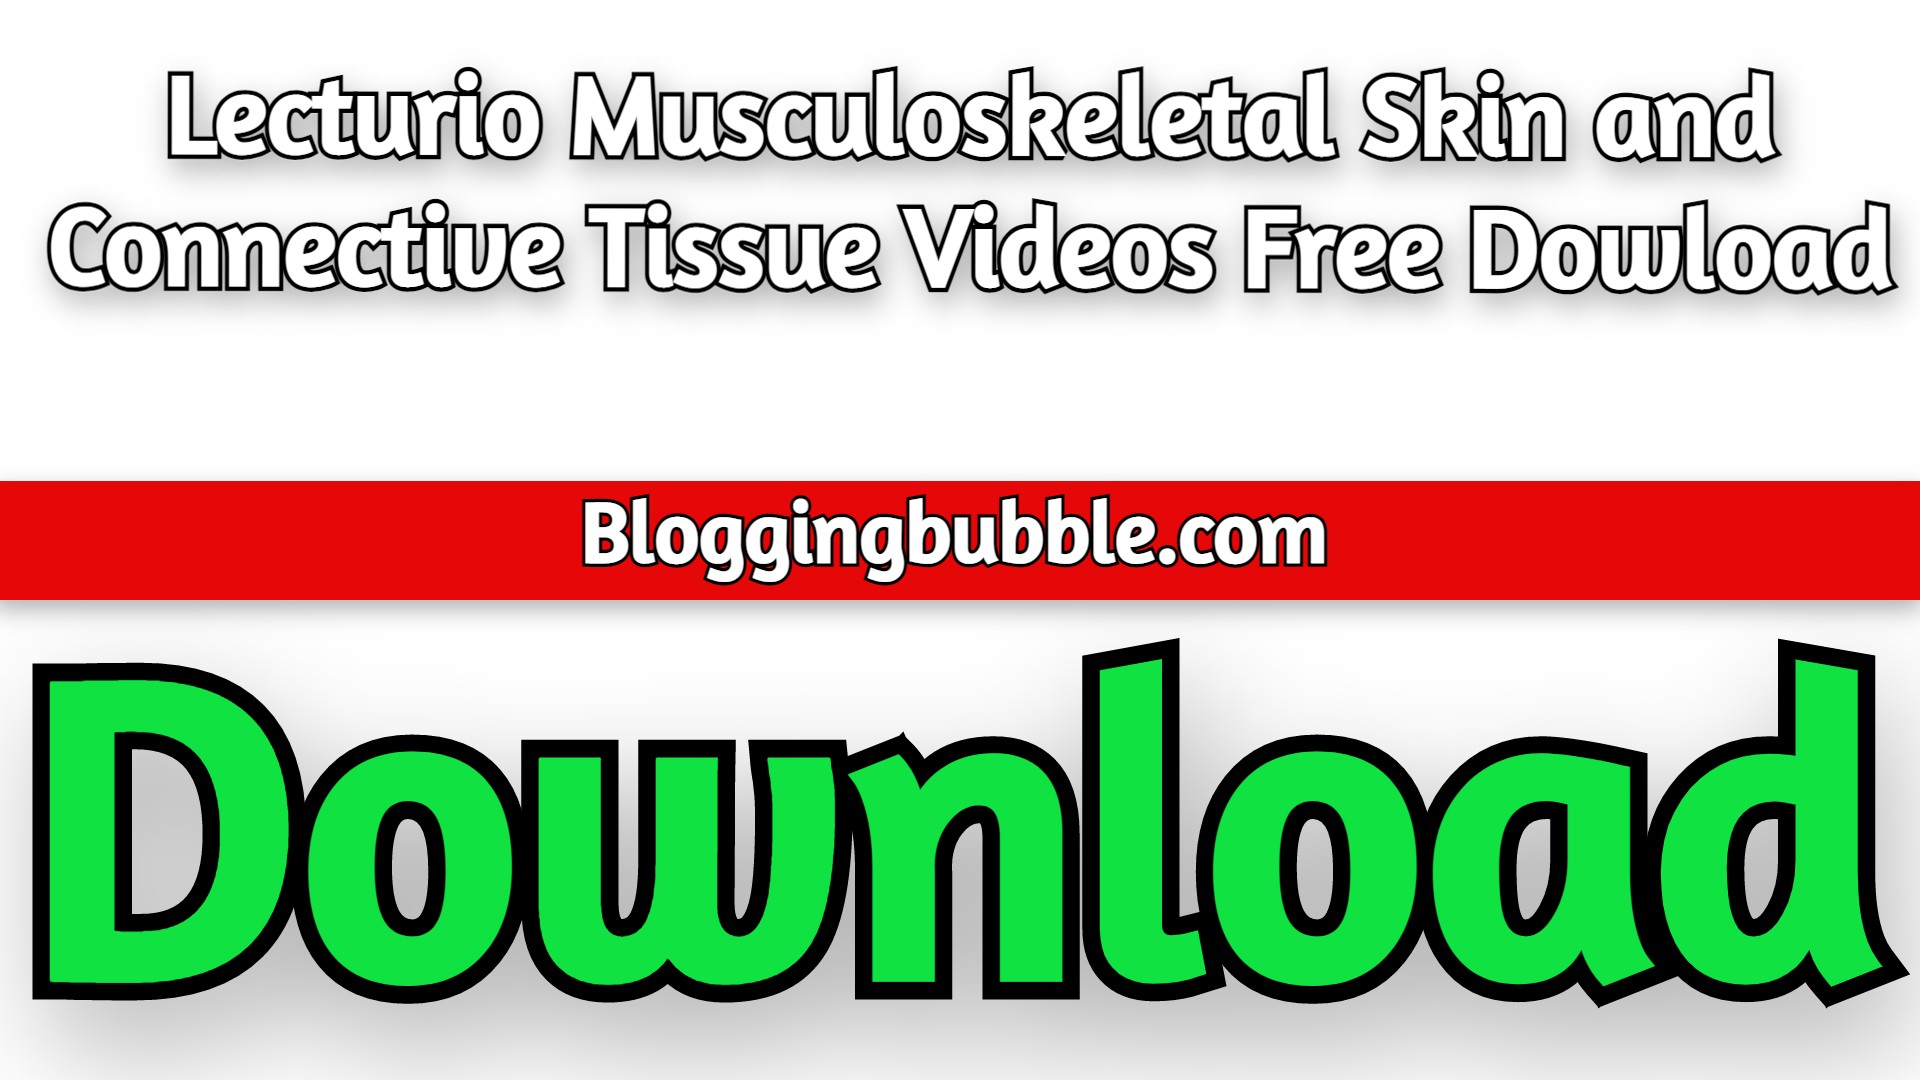 Lecturio Musculoskeletal Skin and Connective Tissue Videos 2022 Free Dowload